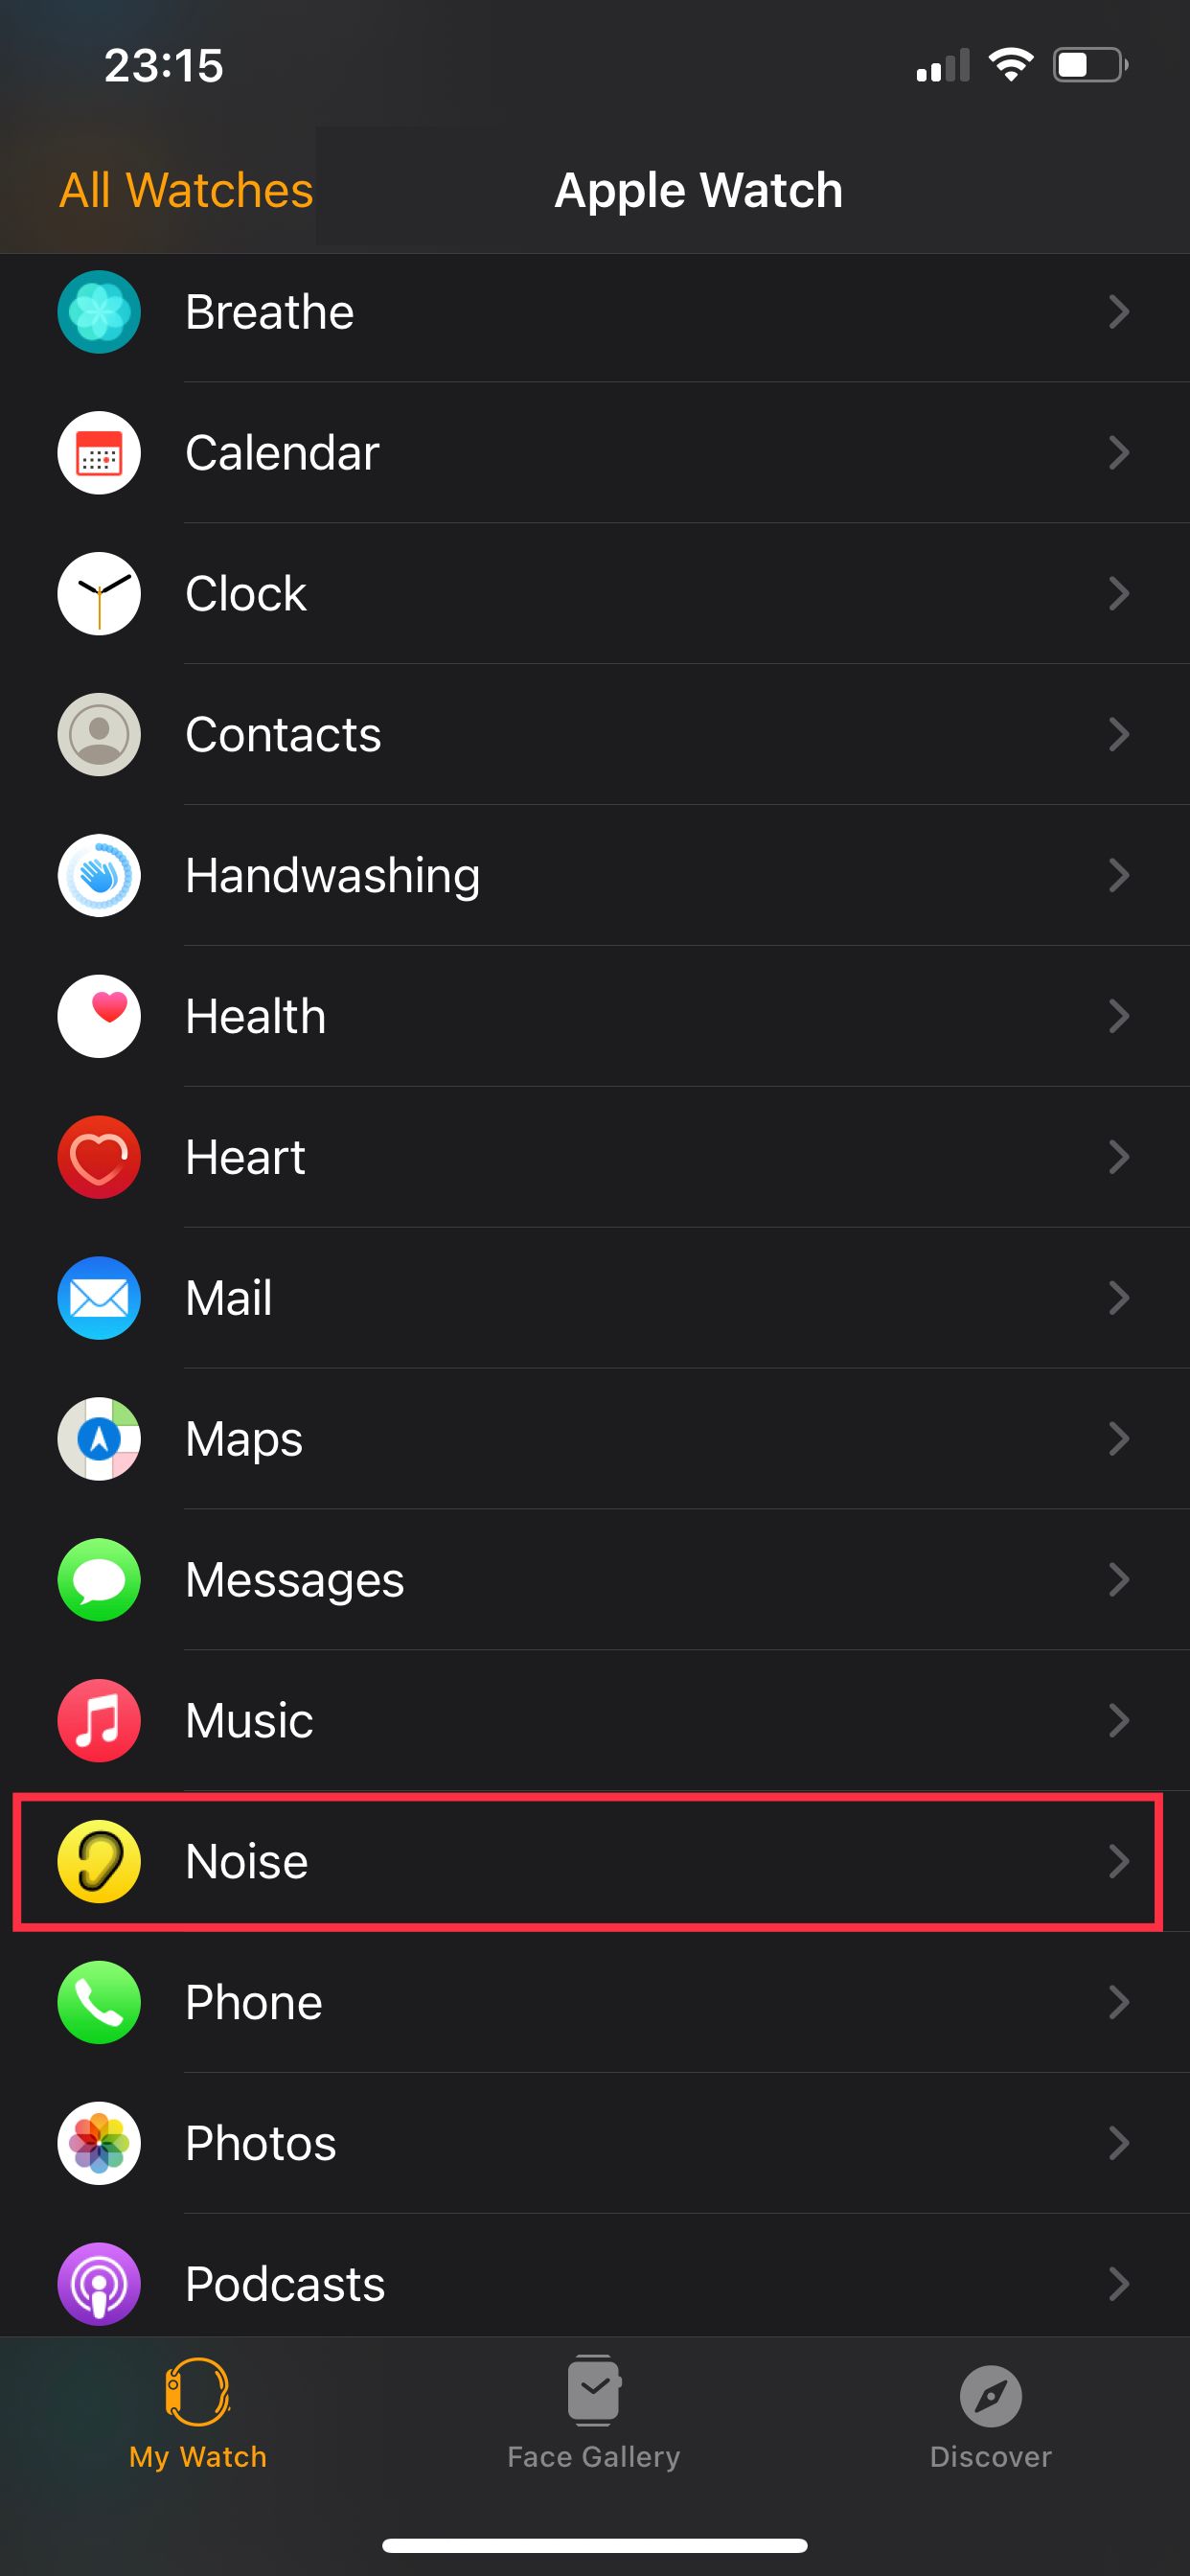 Noise measurement settings in the Watch app.